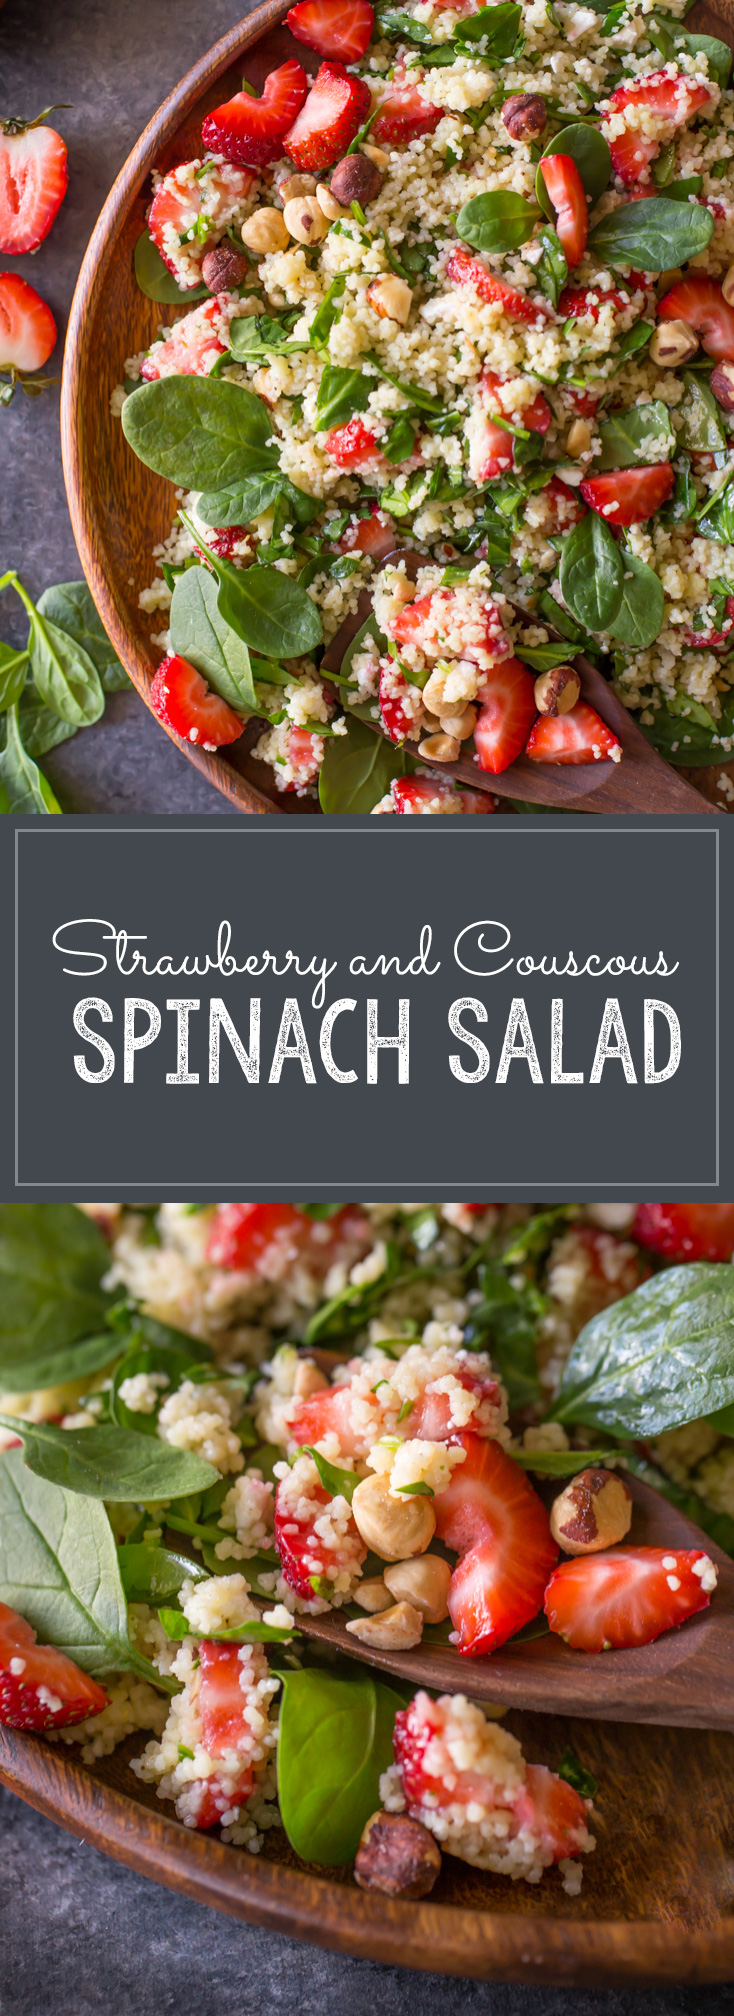 Strawberry and Couscous Spinach Salad - Lovely Little Kitchen